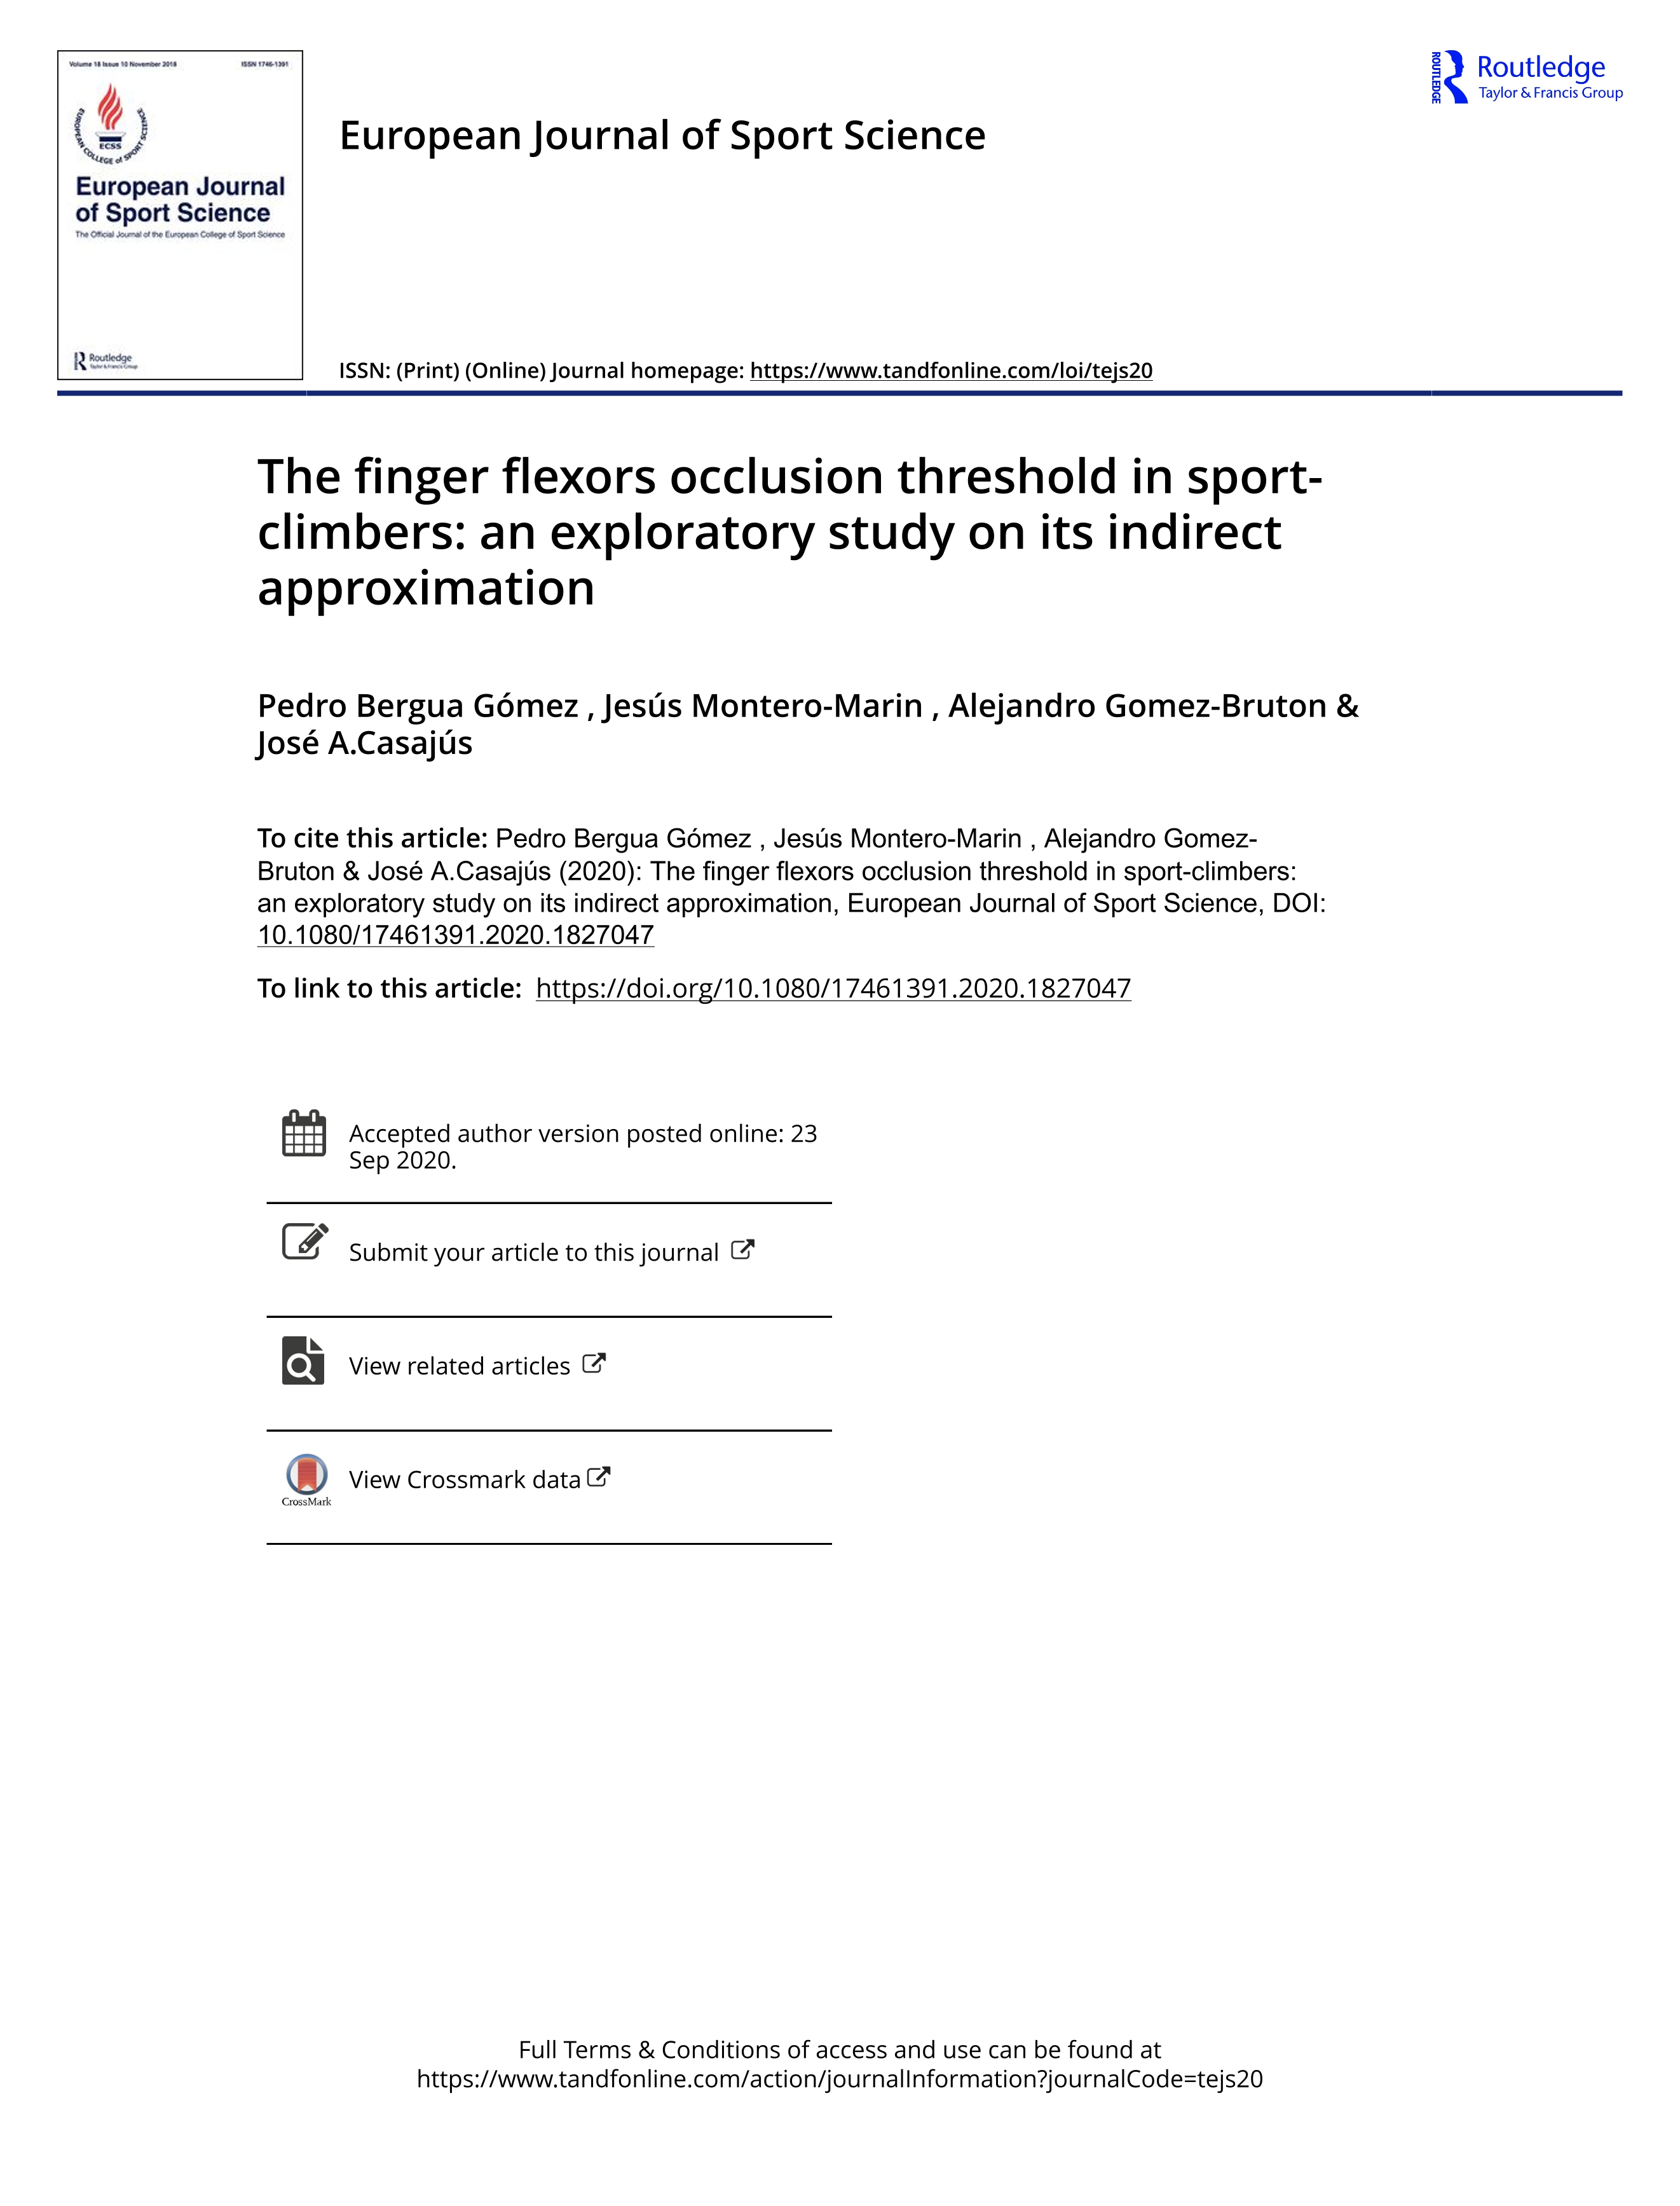 The finger flexors occlusion threshold in sport-climbers: an exploratory study on its indirect approximation